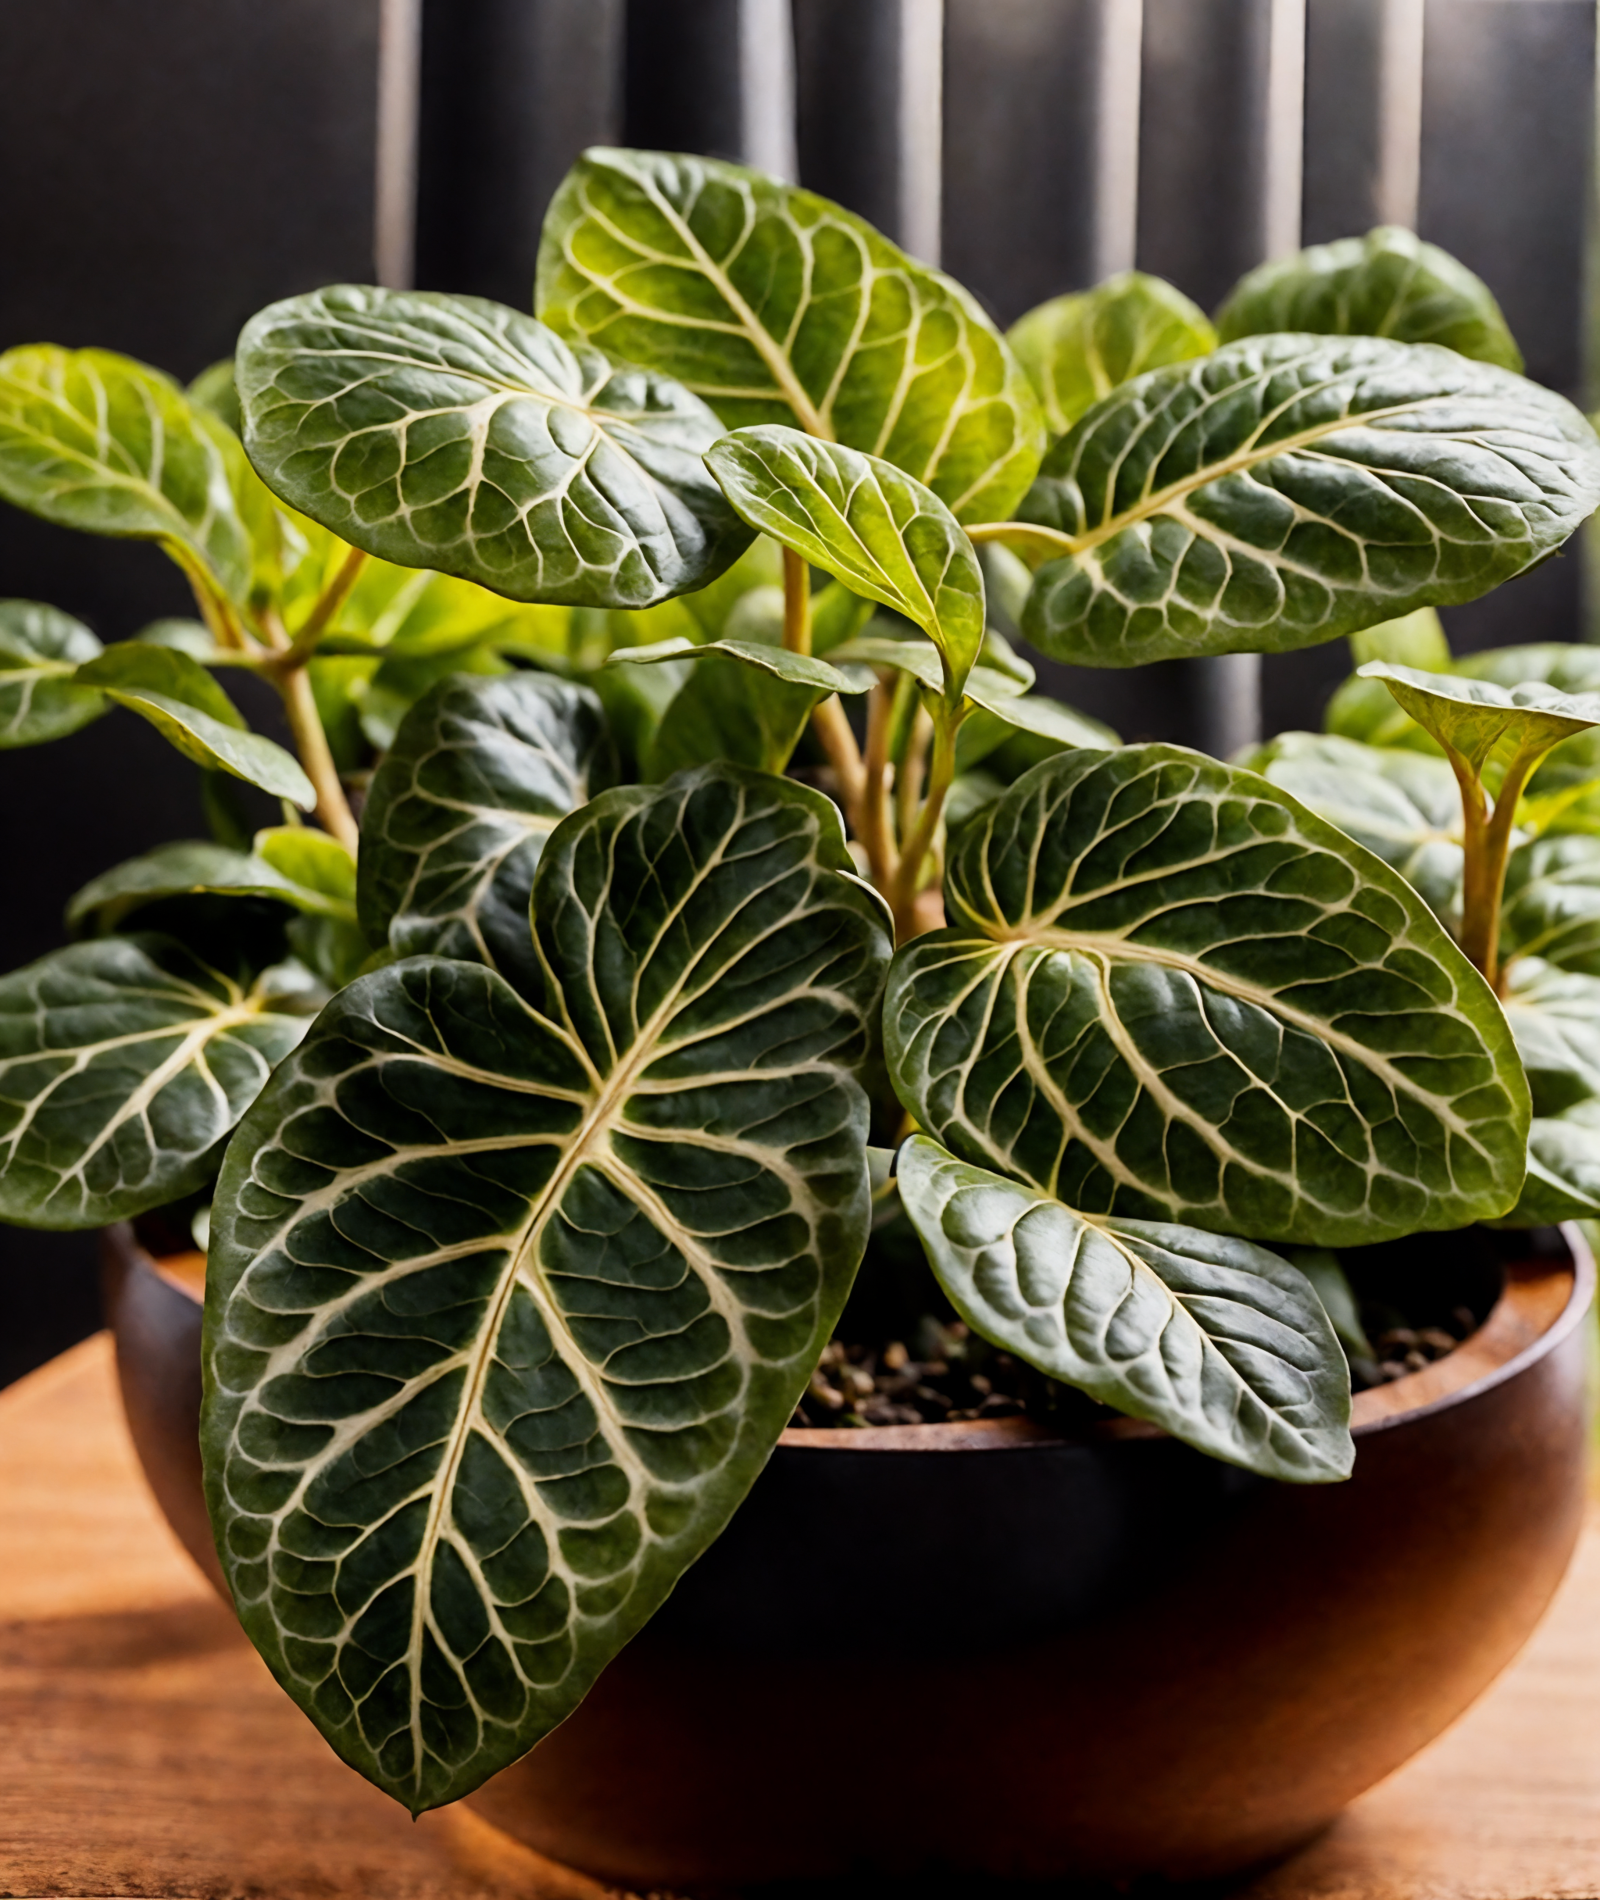 Fittonia albivenis, with veined leaves, in a bowl planter on a wooden surface, clear lighting, dark background.